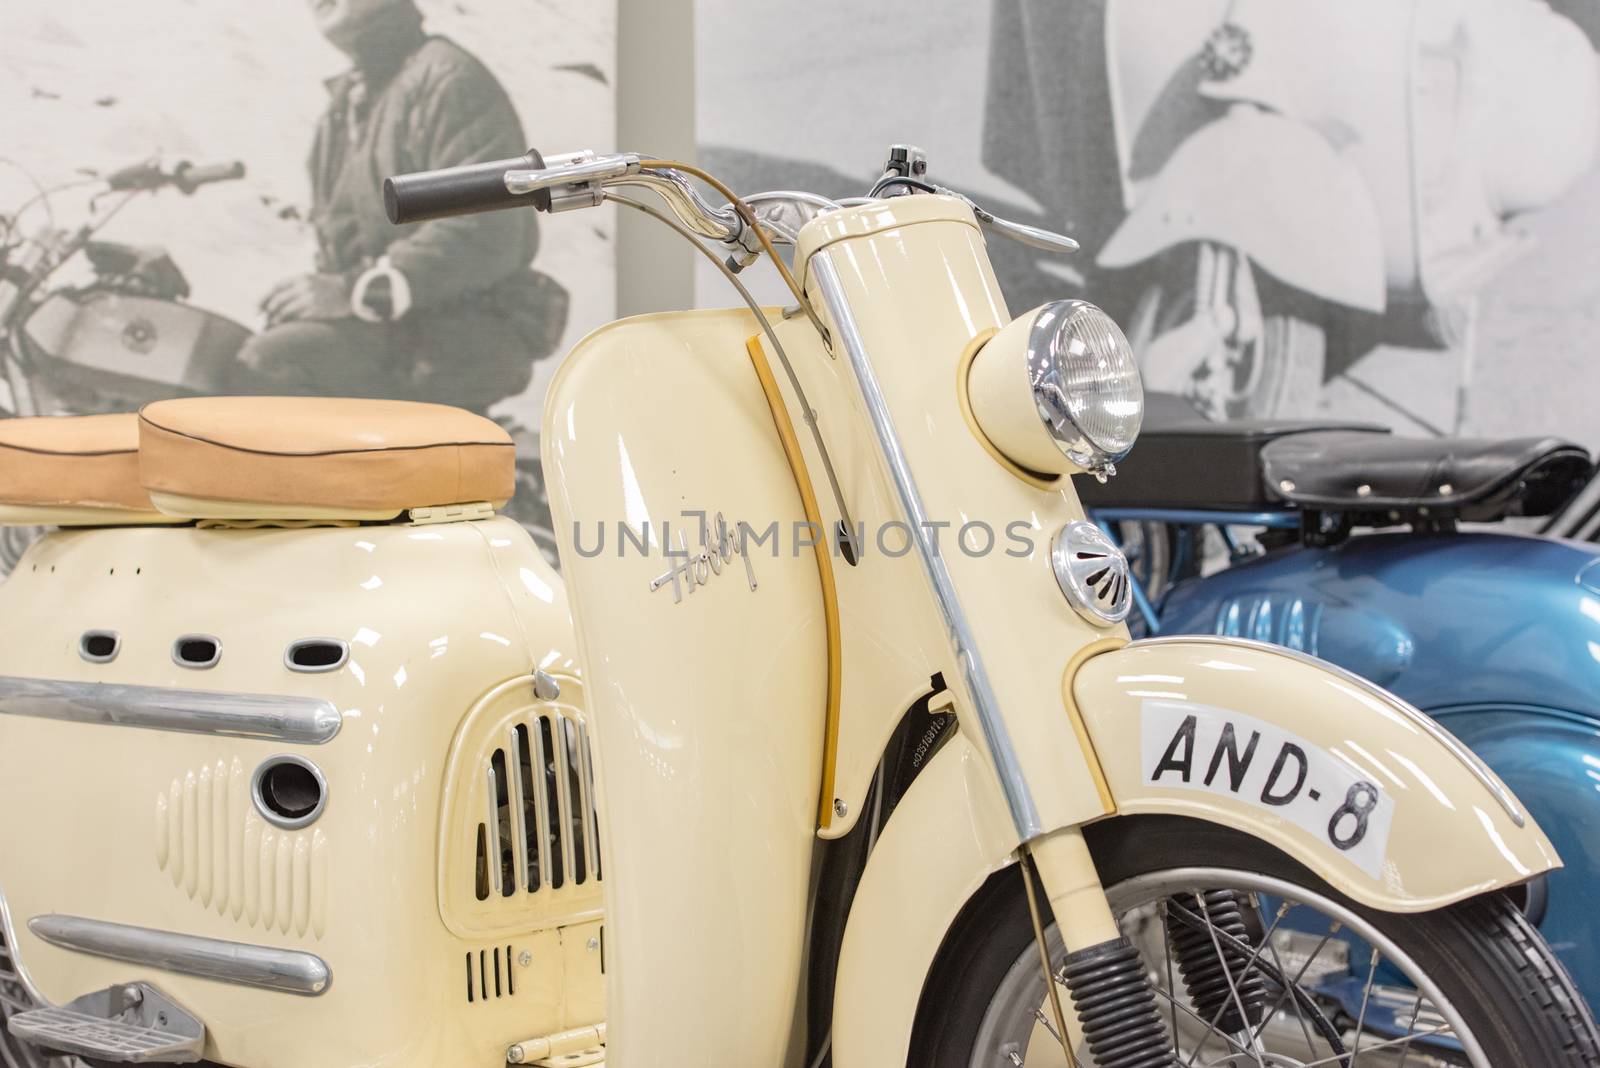 Canillo, Andorra - june 19 2020: Old motorcycle Hobby exposed on  the  Motorcyle Museum in Canillo, Andorra on June 19, 2020.